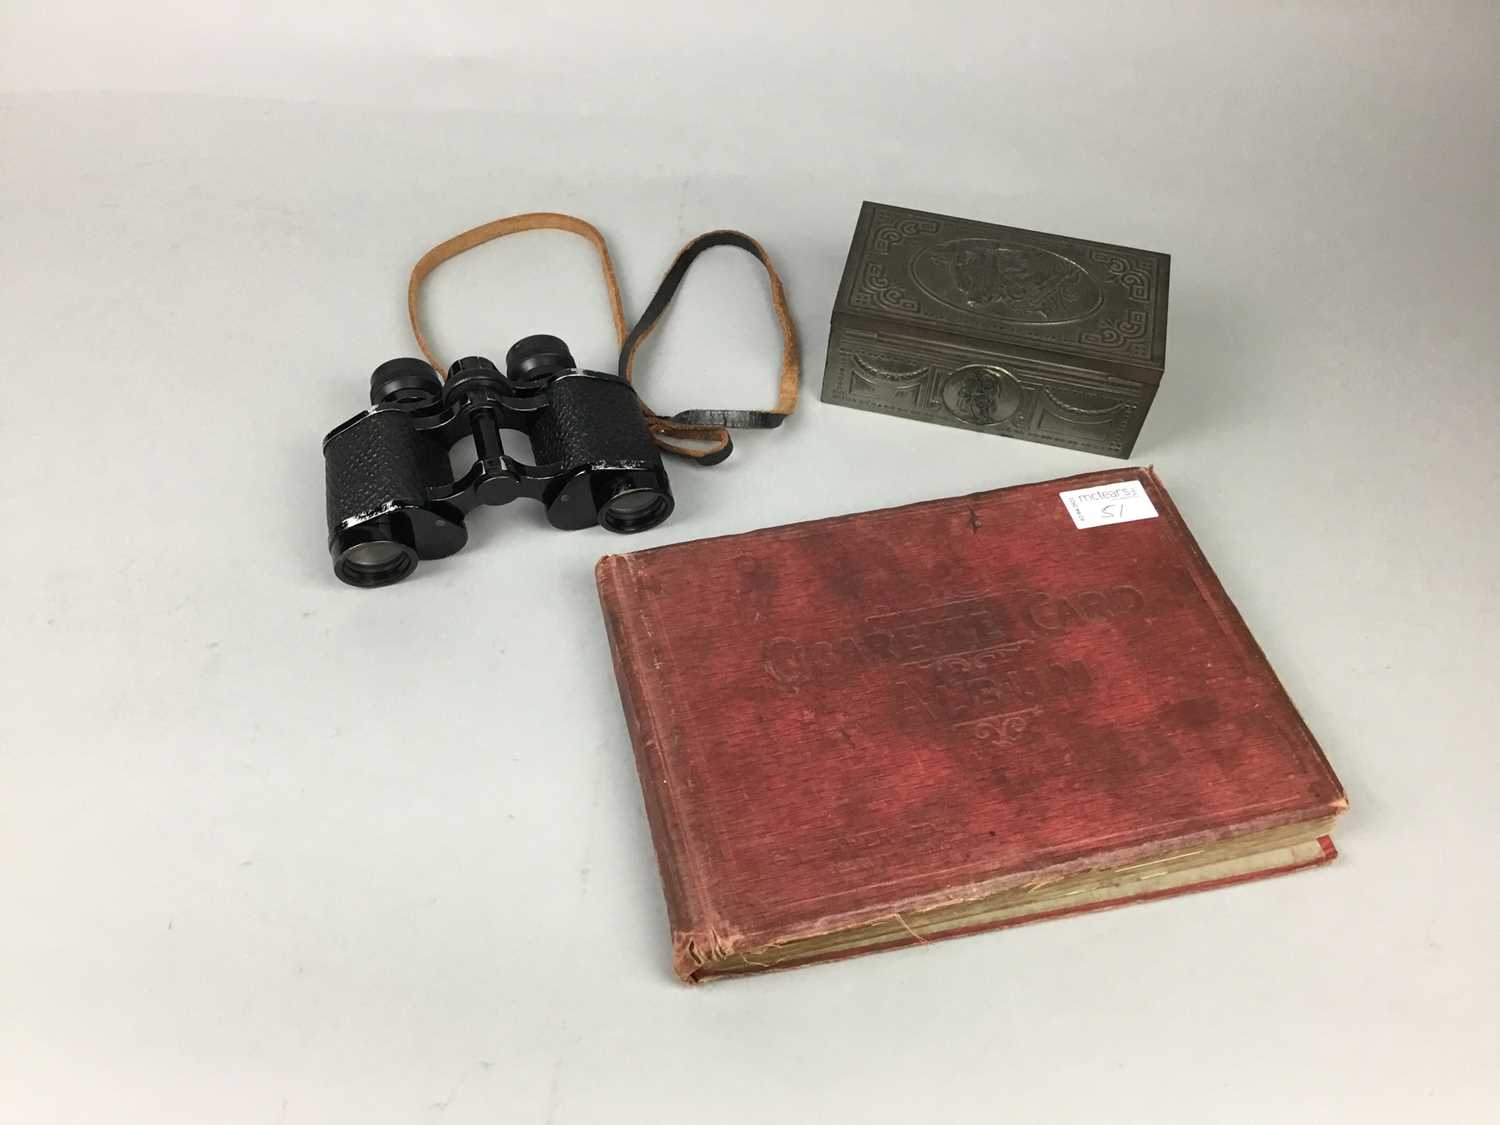 Lot 51 - A PAIR OF CASED FIELD GLASSES, ALONG WITH OTHER RELATED EPHEMERA